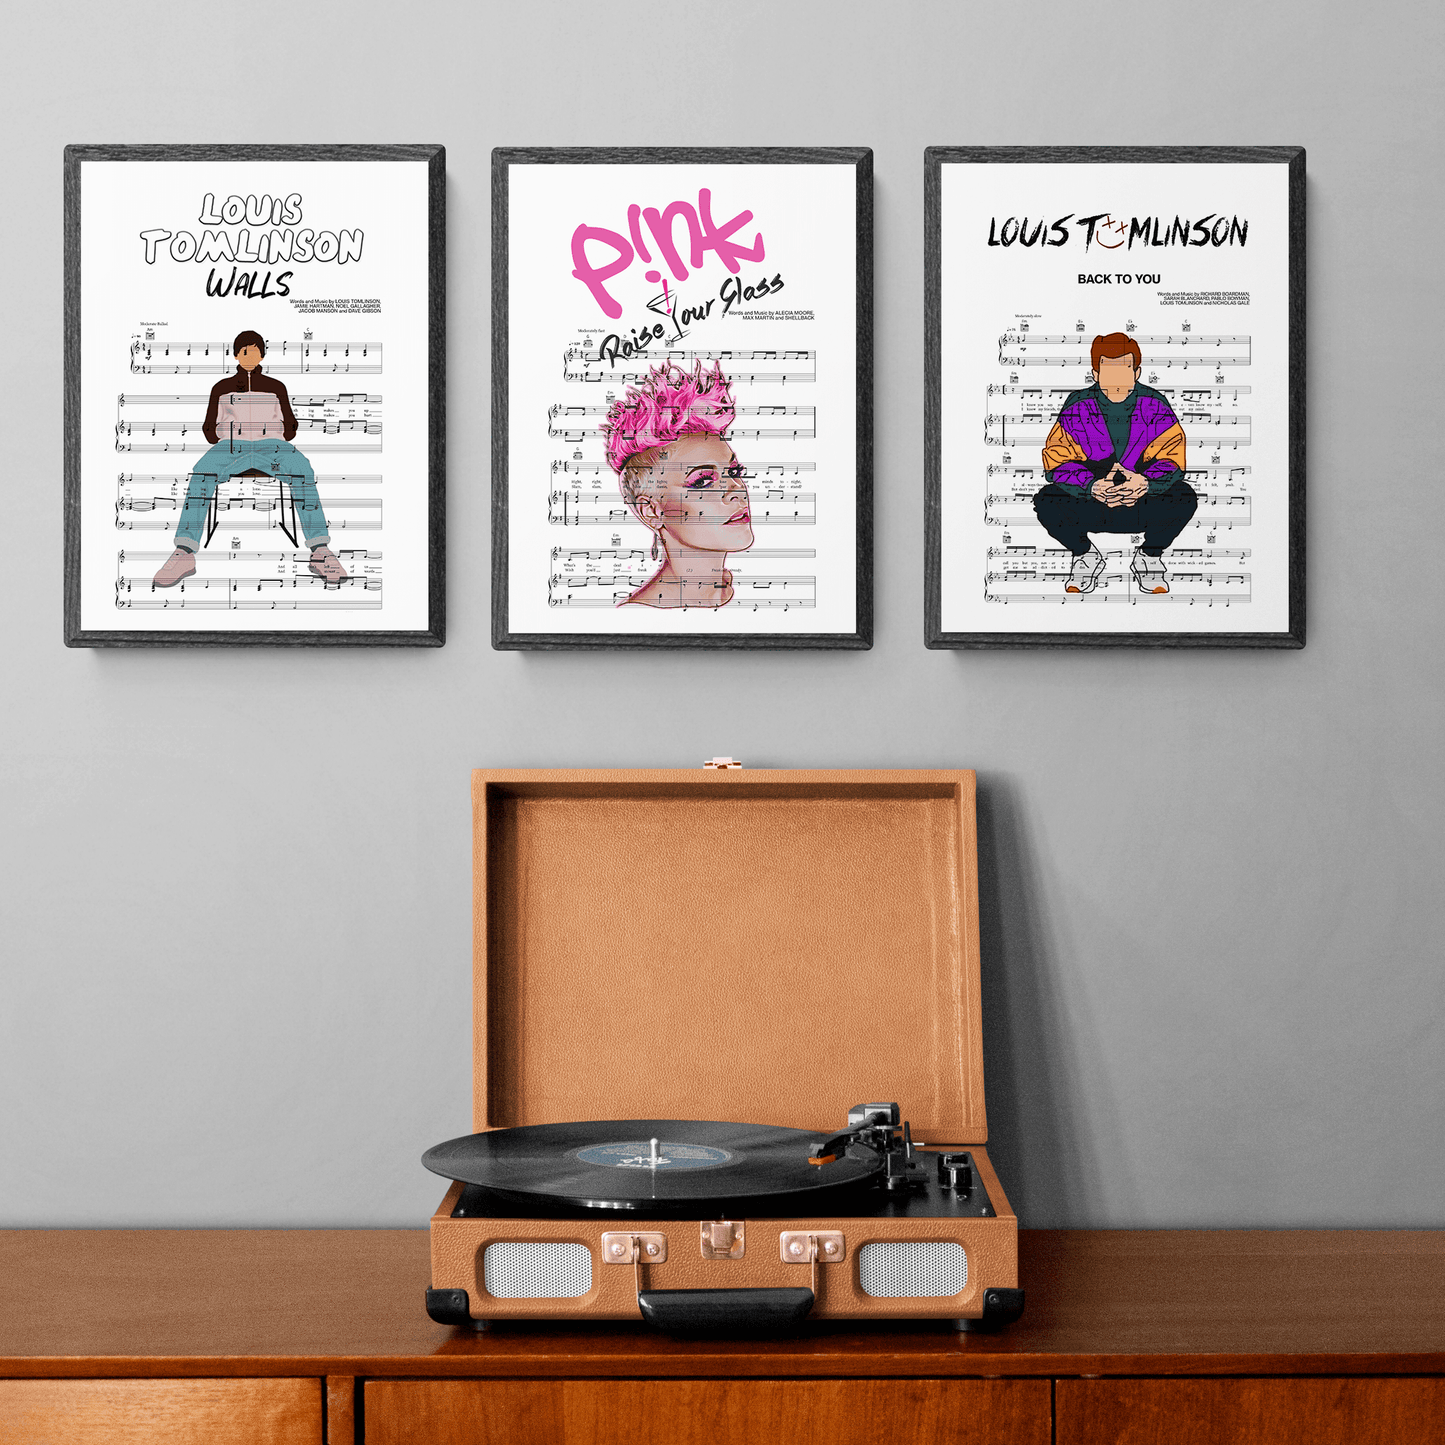 This premium song lyric art print offers the perfect way to bring the meaningful words of your favorite songs to life. Each high quality piece is hand-crafted, with music lyrics printed on thick, durable paper. Enjoy a variety of frame and poster options, allowing you to customize the song and create a unique lyric art piece. Add a personal touch to any room and give the gift of music with these beautiful framed lyric prints.